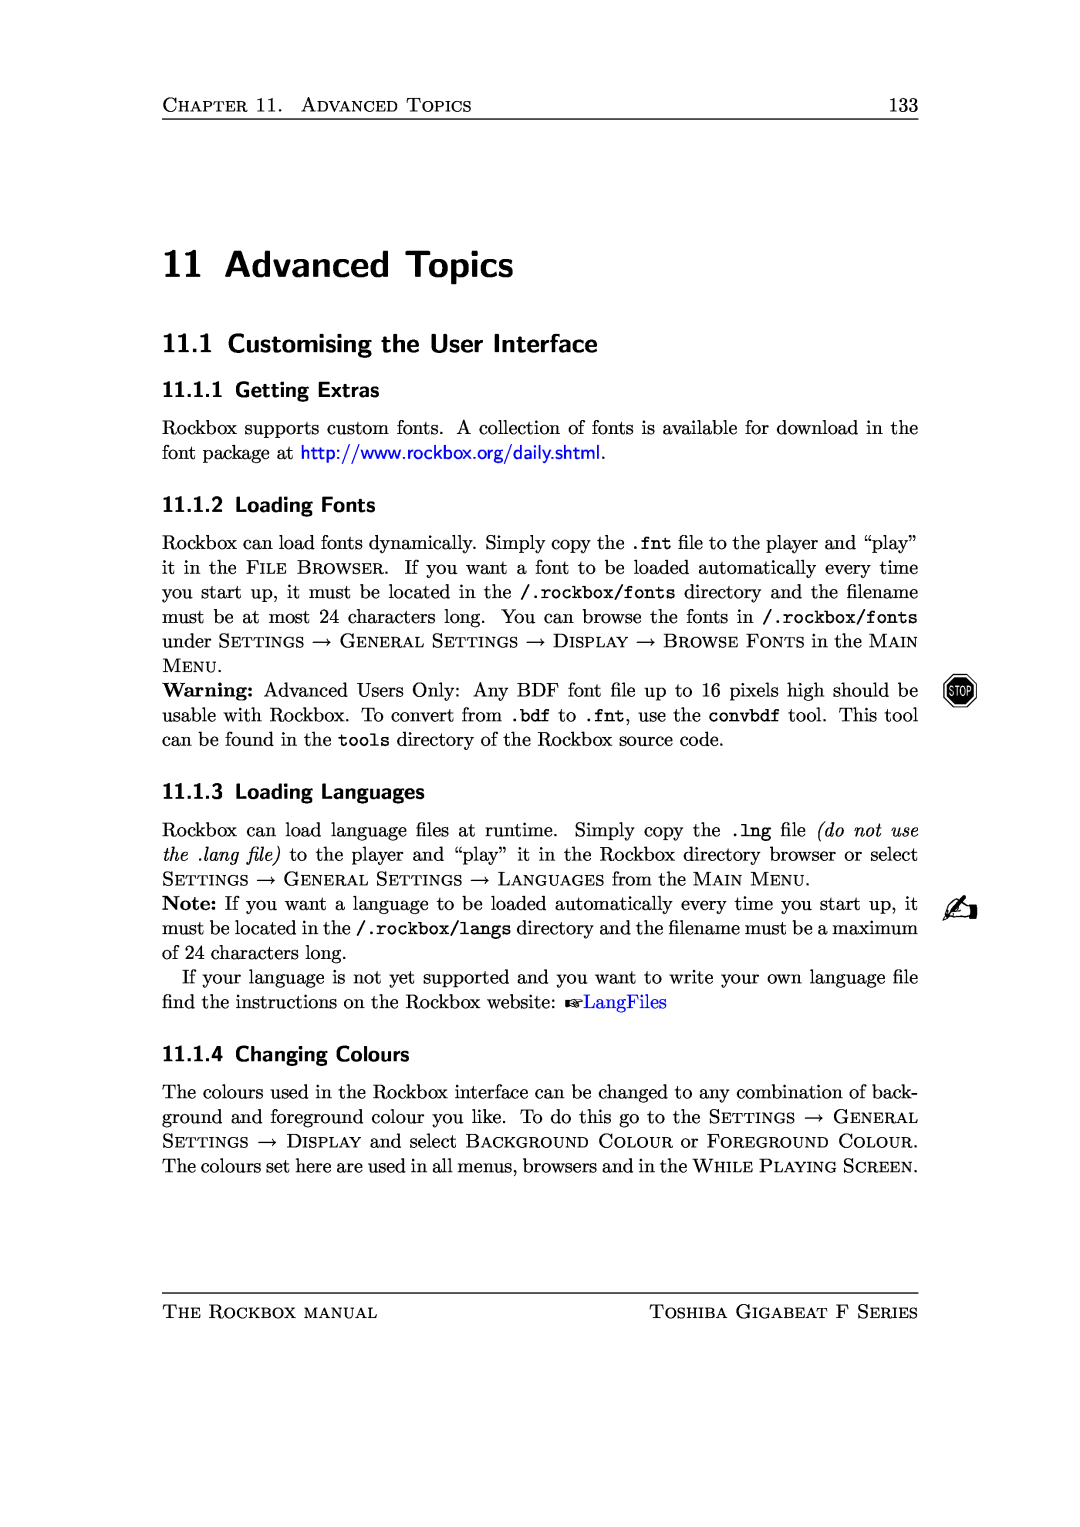 Toshiba F Series manual Advanced Topics, Customising the User Interface, Getting Extras, Loading Fonts, Loading Languages 